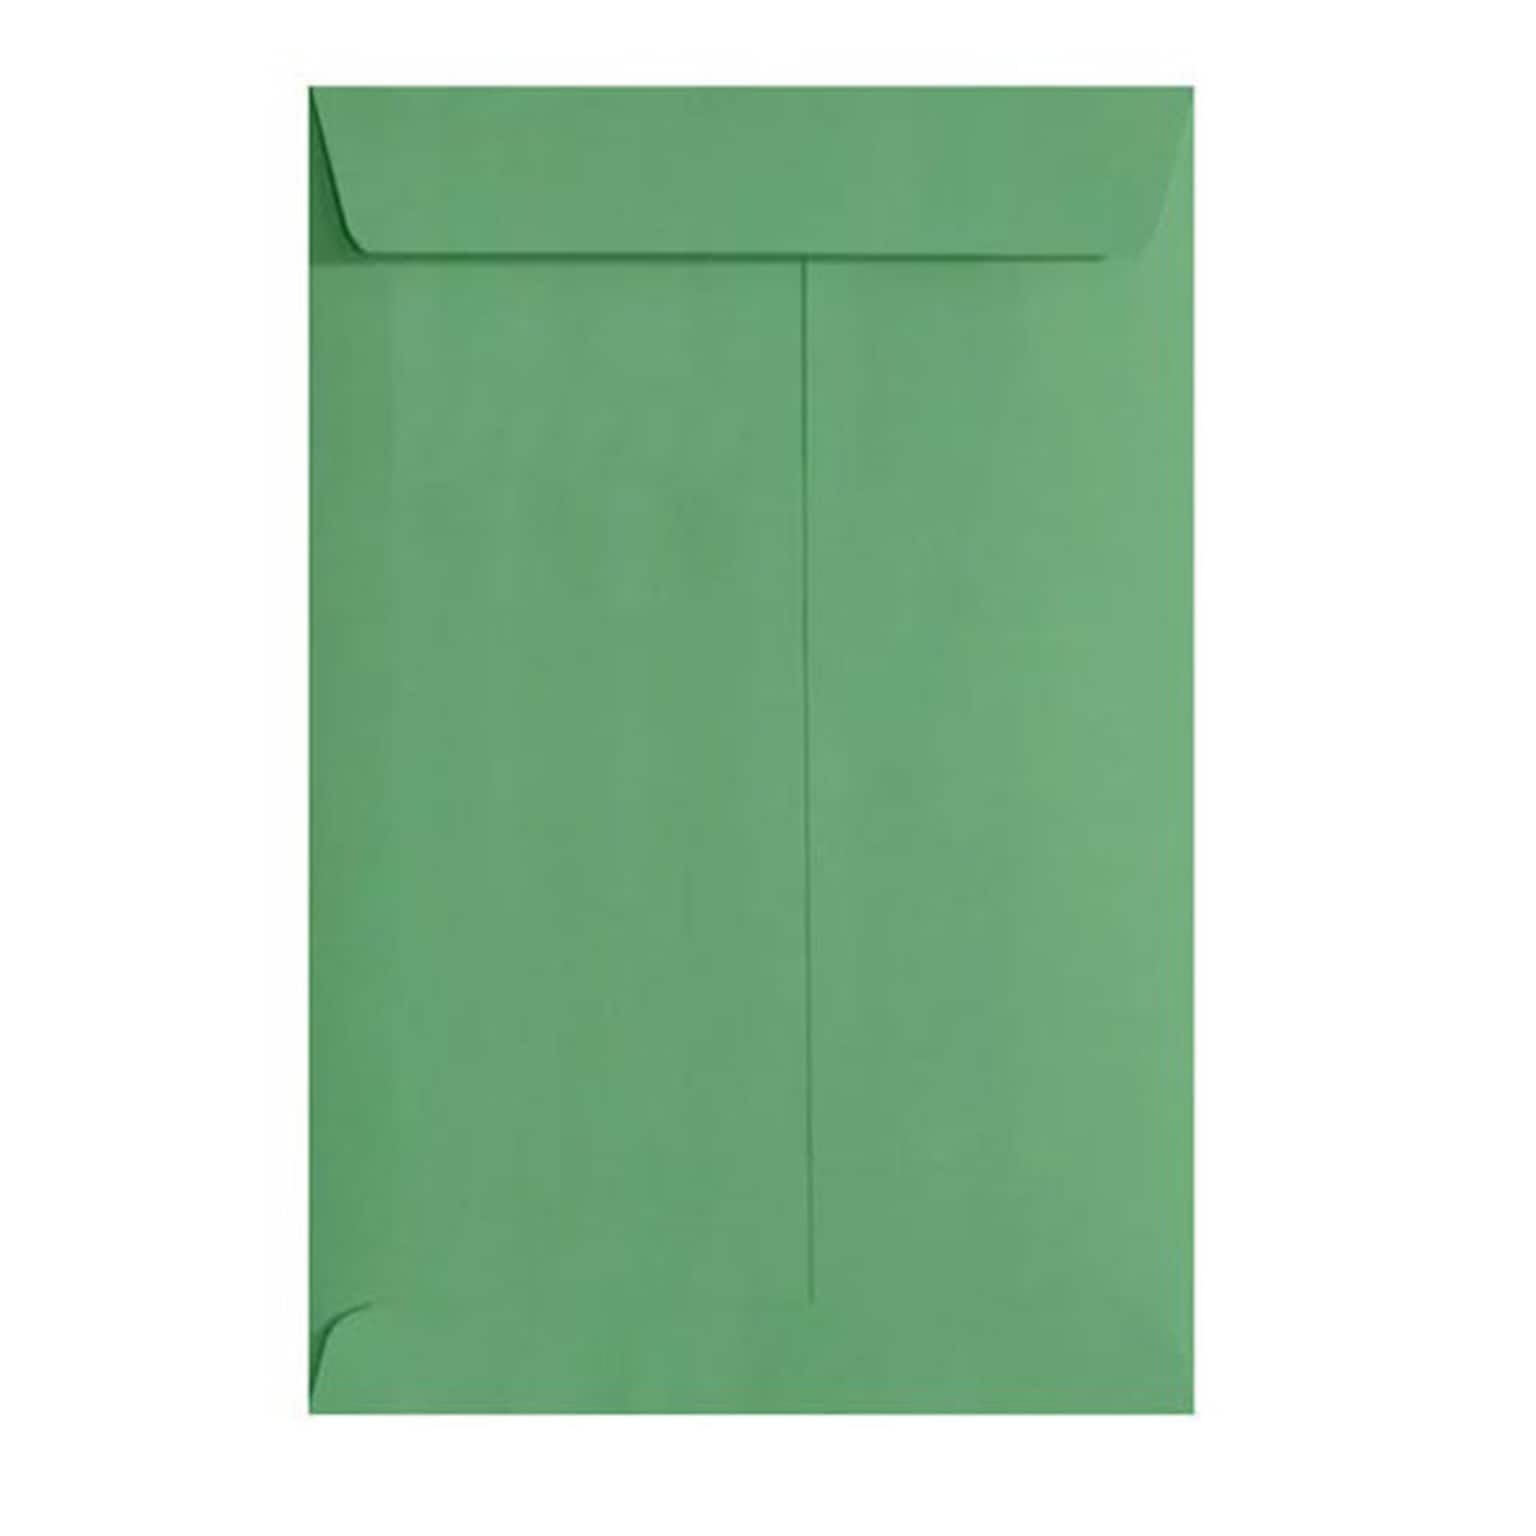 JAM Paper 10 x 13 Open End Envelopes, Holiday Green, 500/Pack (4897-L17-500)